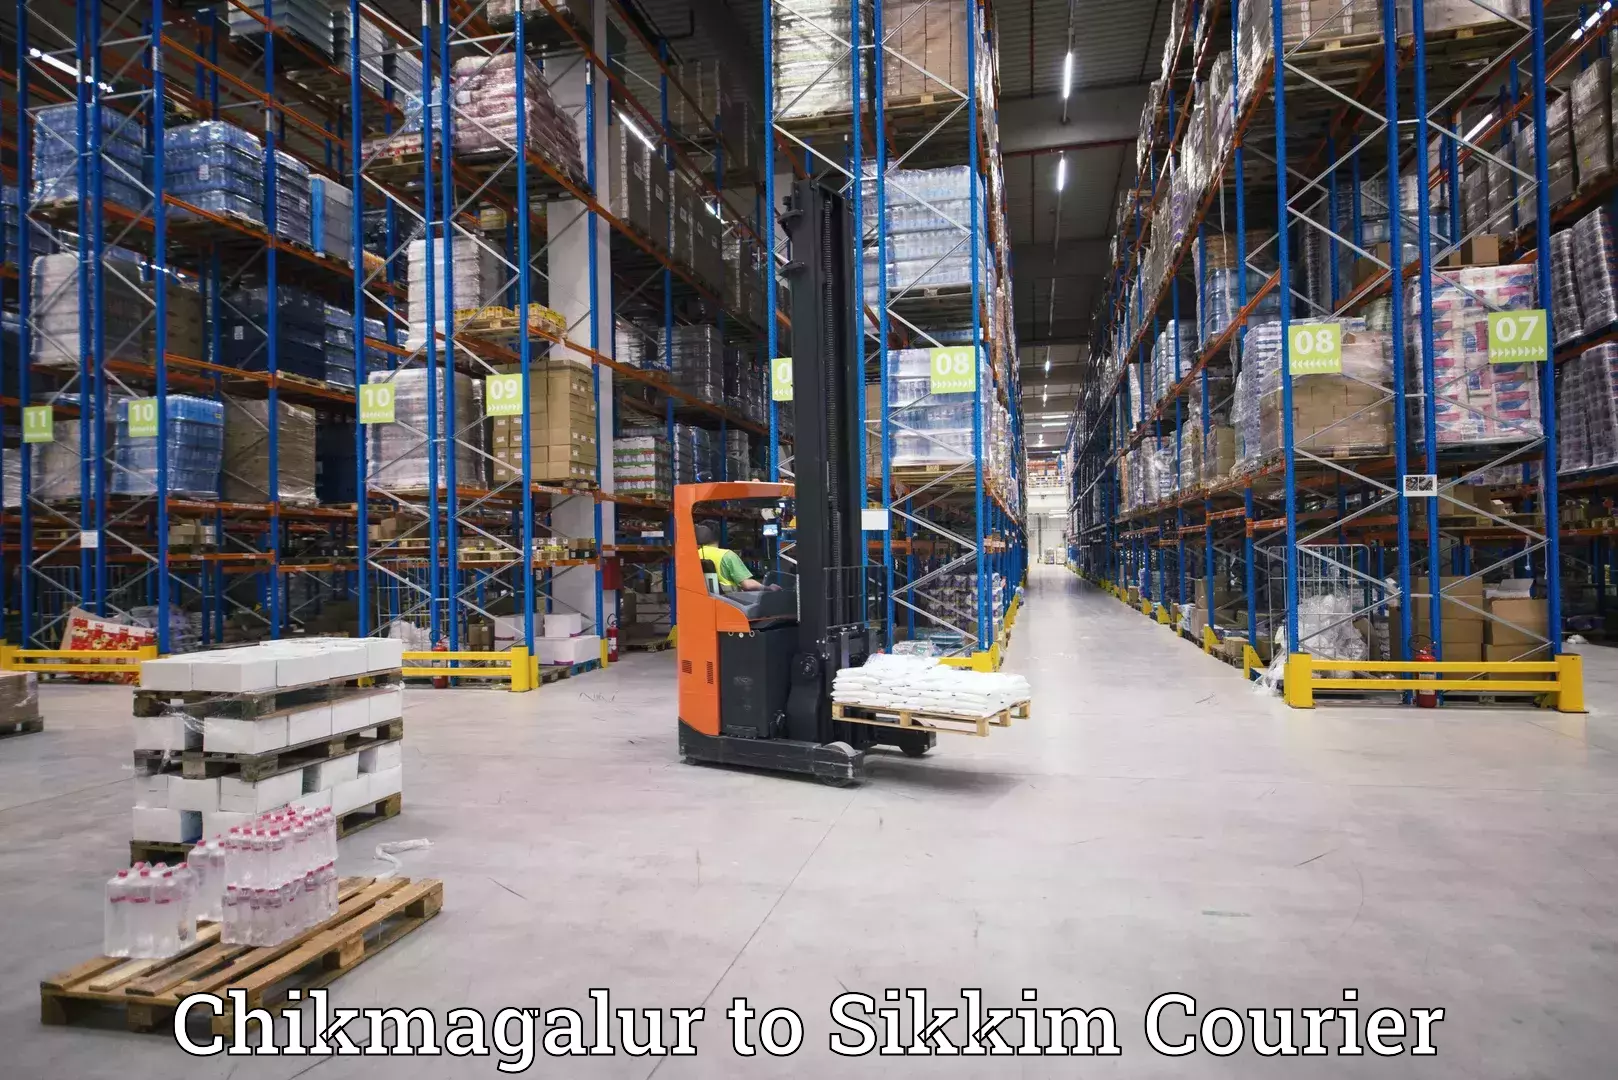 Efficient order fulfillment Chikmagalur to Pelling